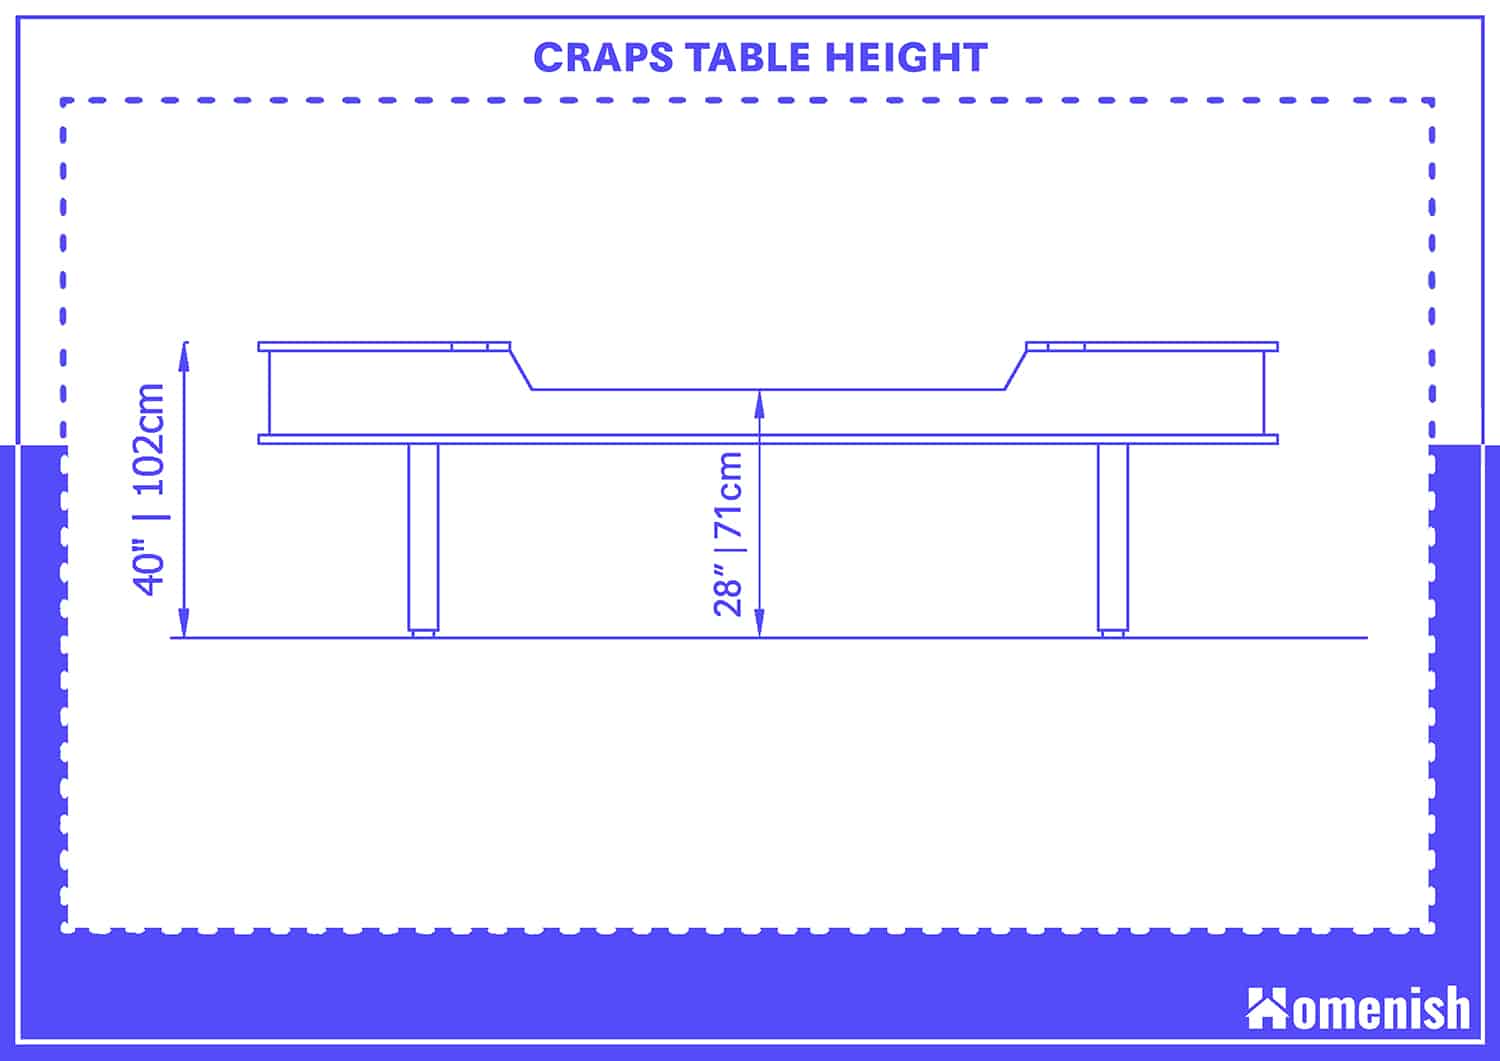 Craps Table Height